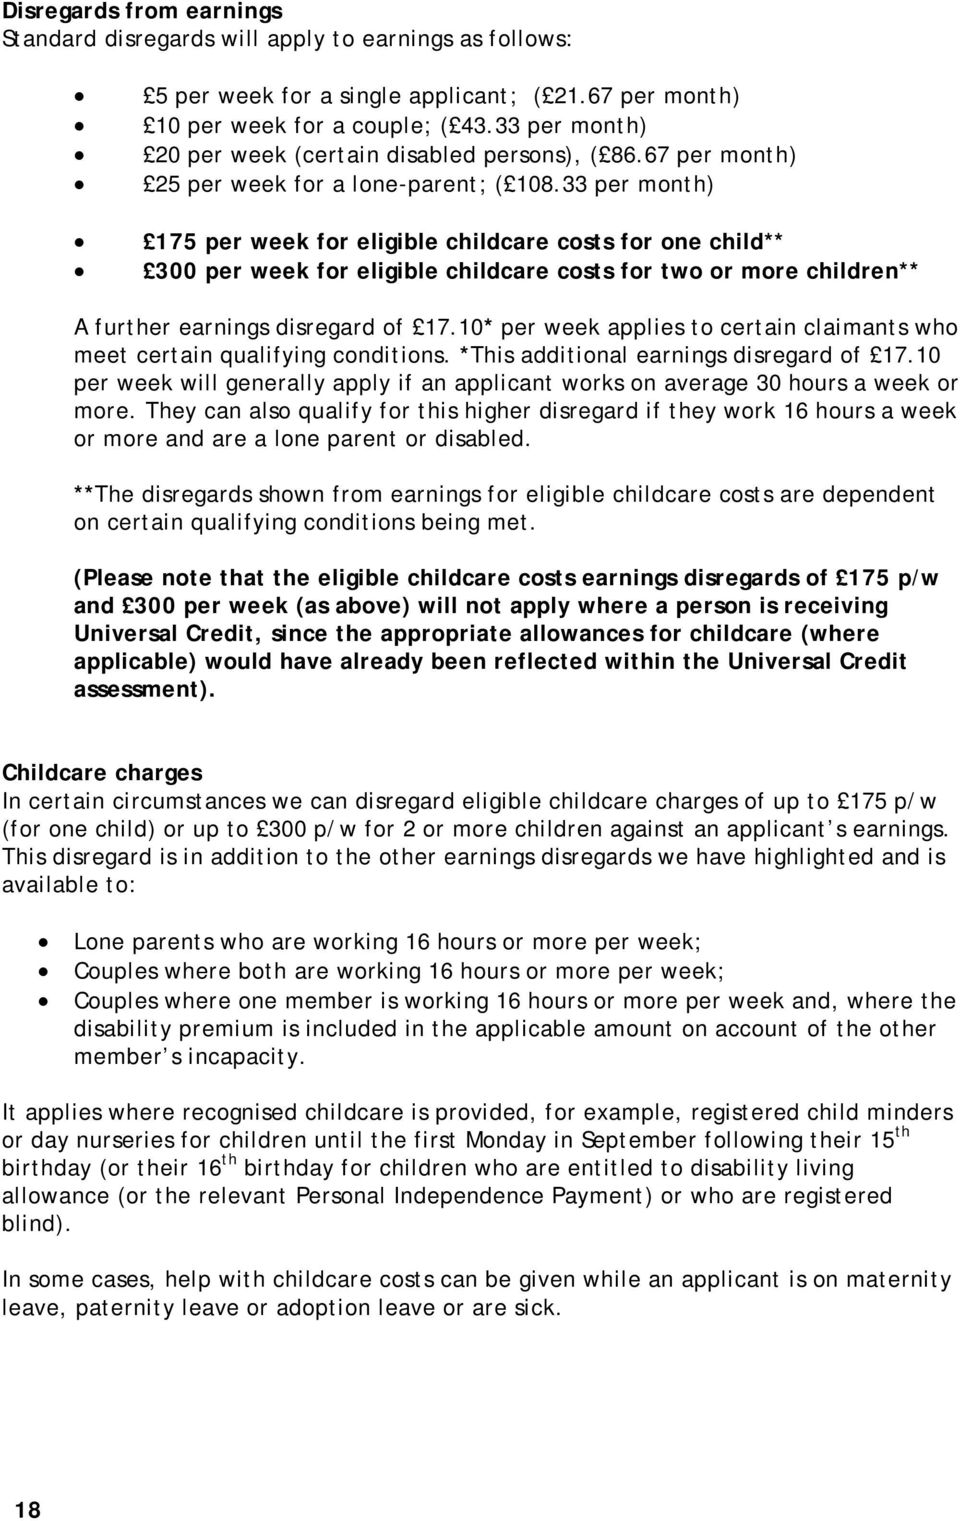 33 per month) 175 per week for eligible childcare costs for one child** 300 per week for eligible childcare costs for two or more children** A further earnings disregard of 17.